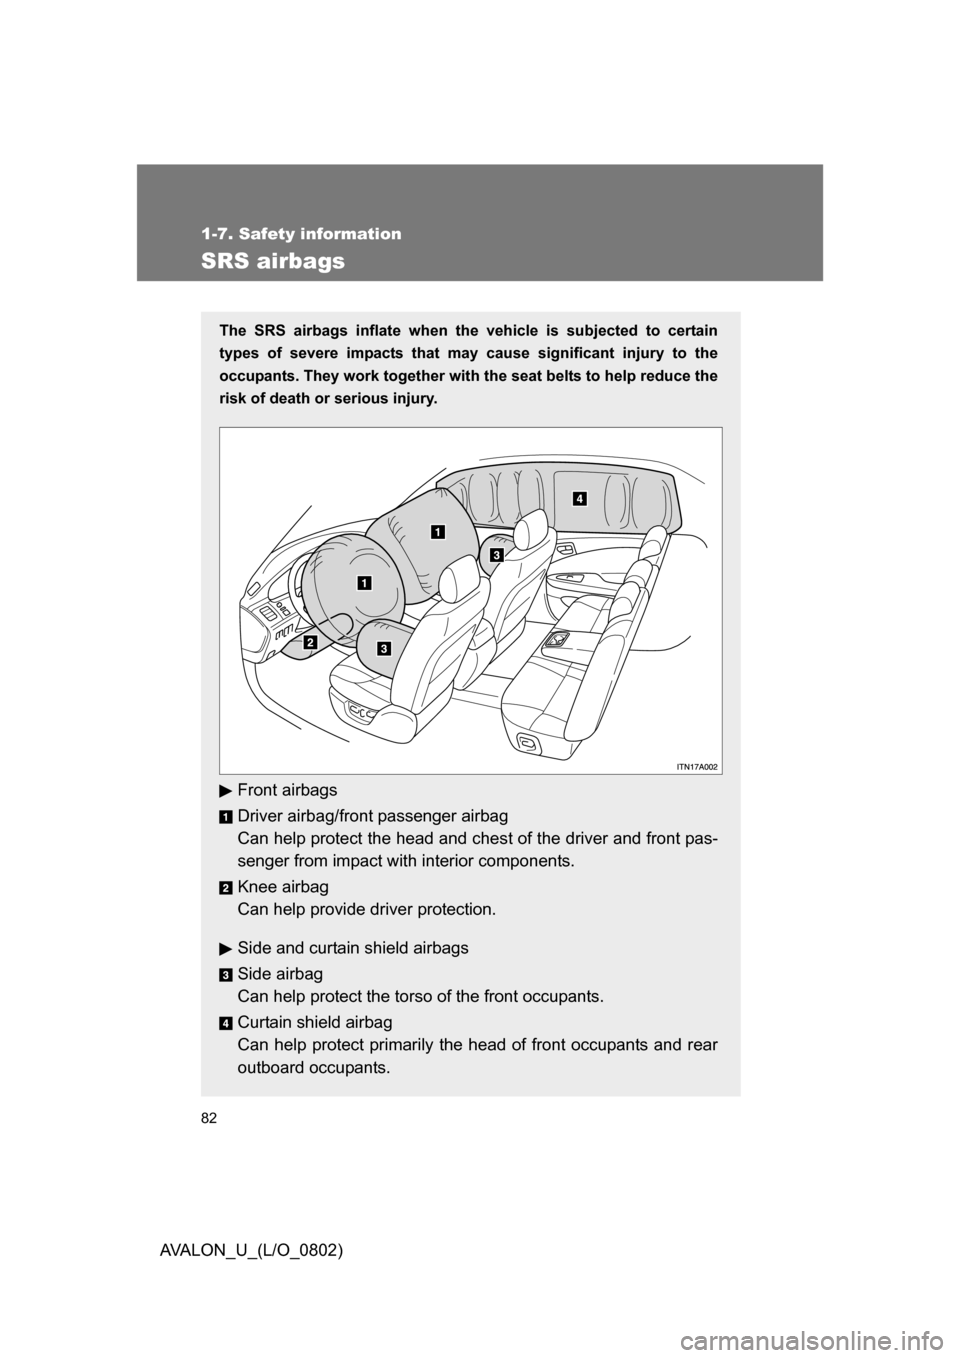 TOYOTA AVALON 2008 XX30 / 3.G Owners Manual 82
1-7. Safety information
AVALON_U_(L/O_0802)
SRS airbags
The SRS airbags inflate when the vehicle is subjected to certain 
types of severe impacts that may  cause significant injury to the 
occupant